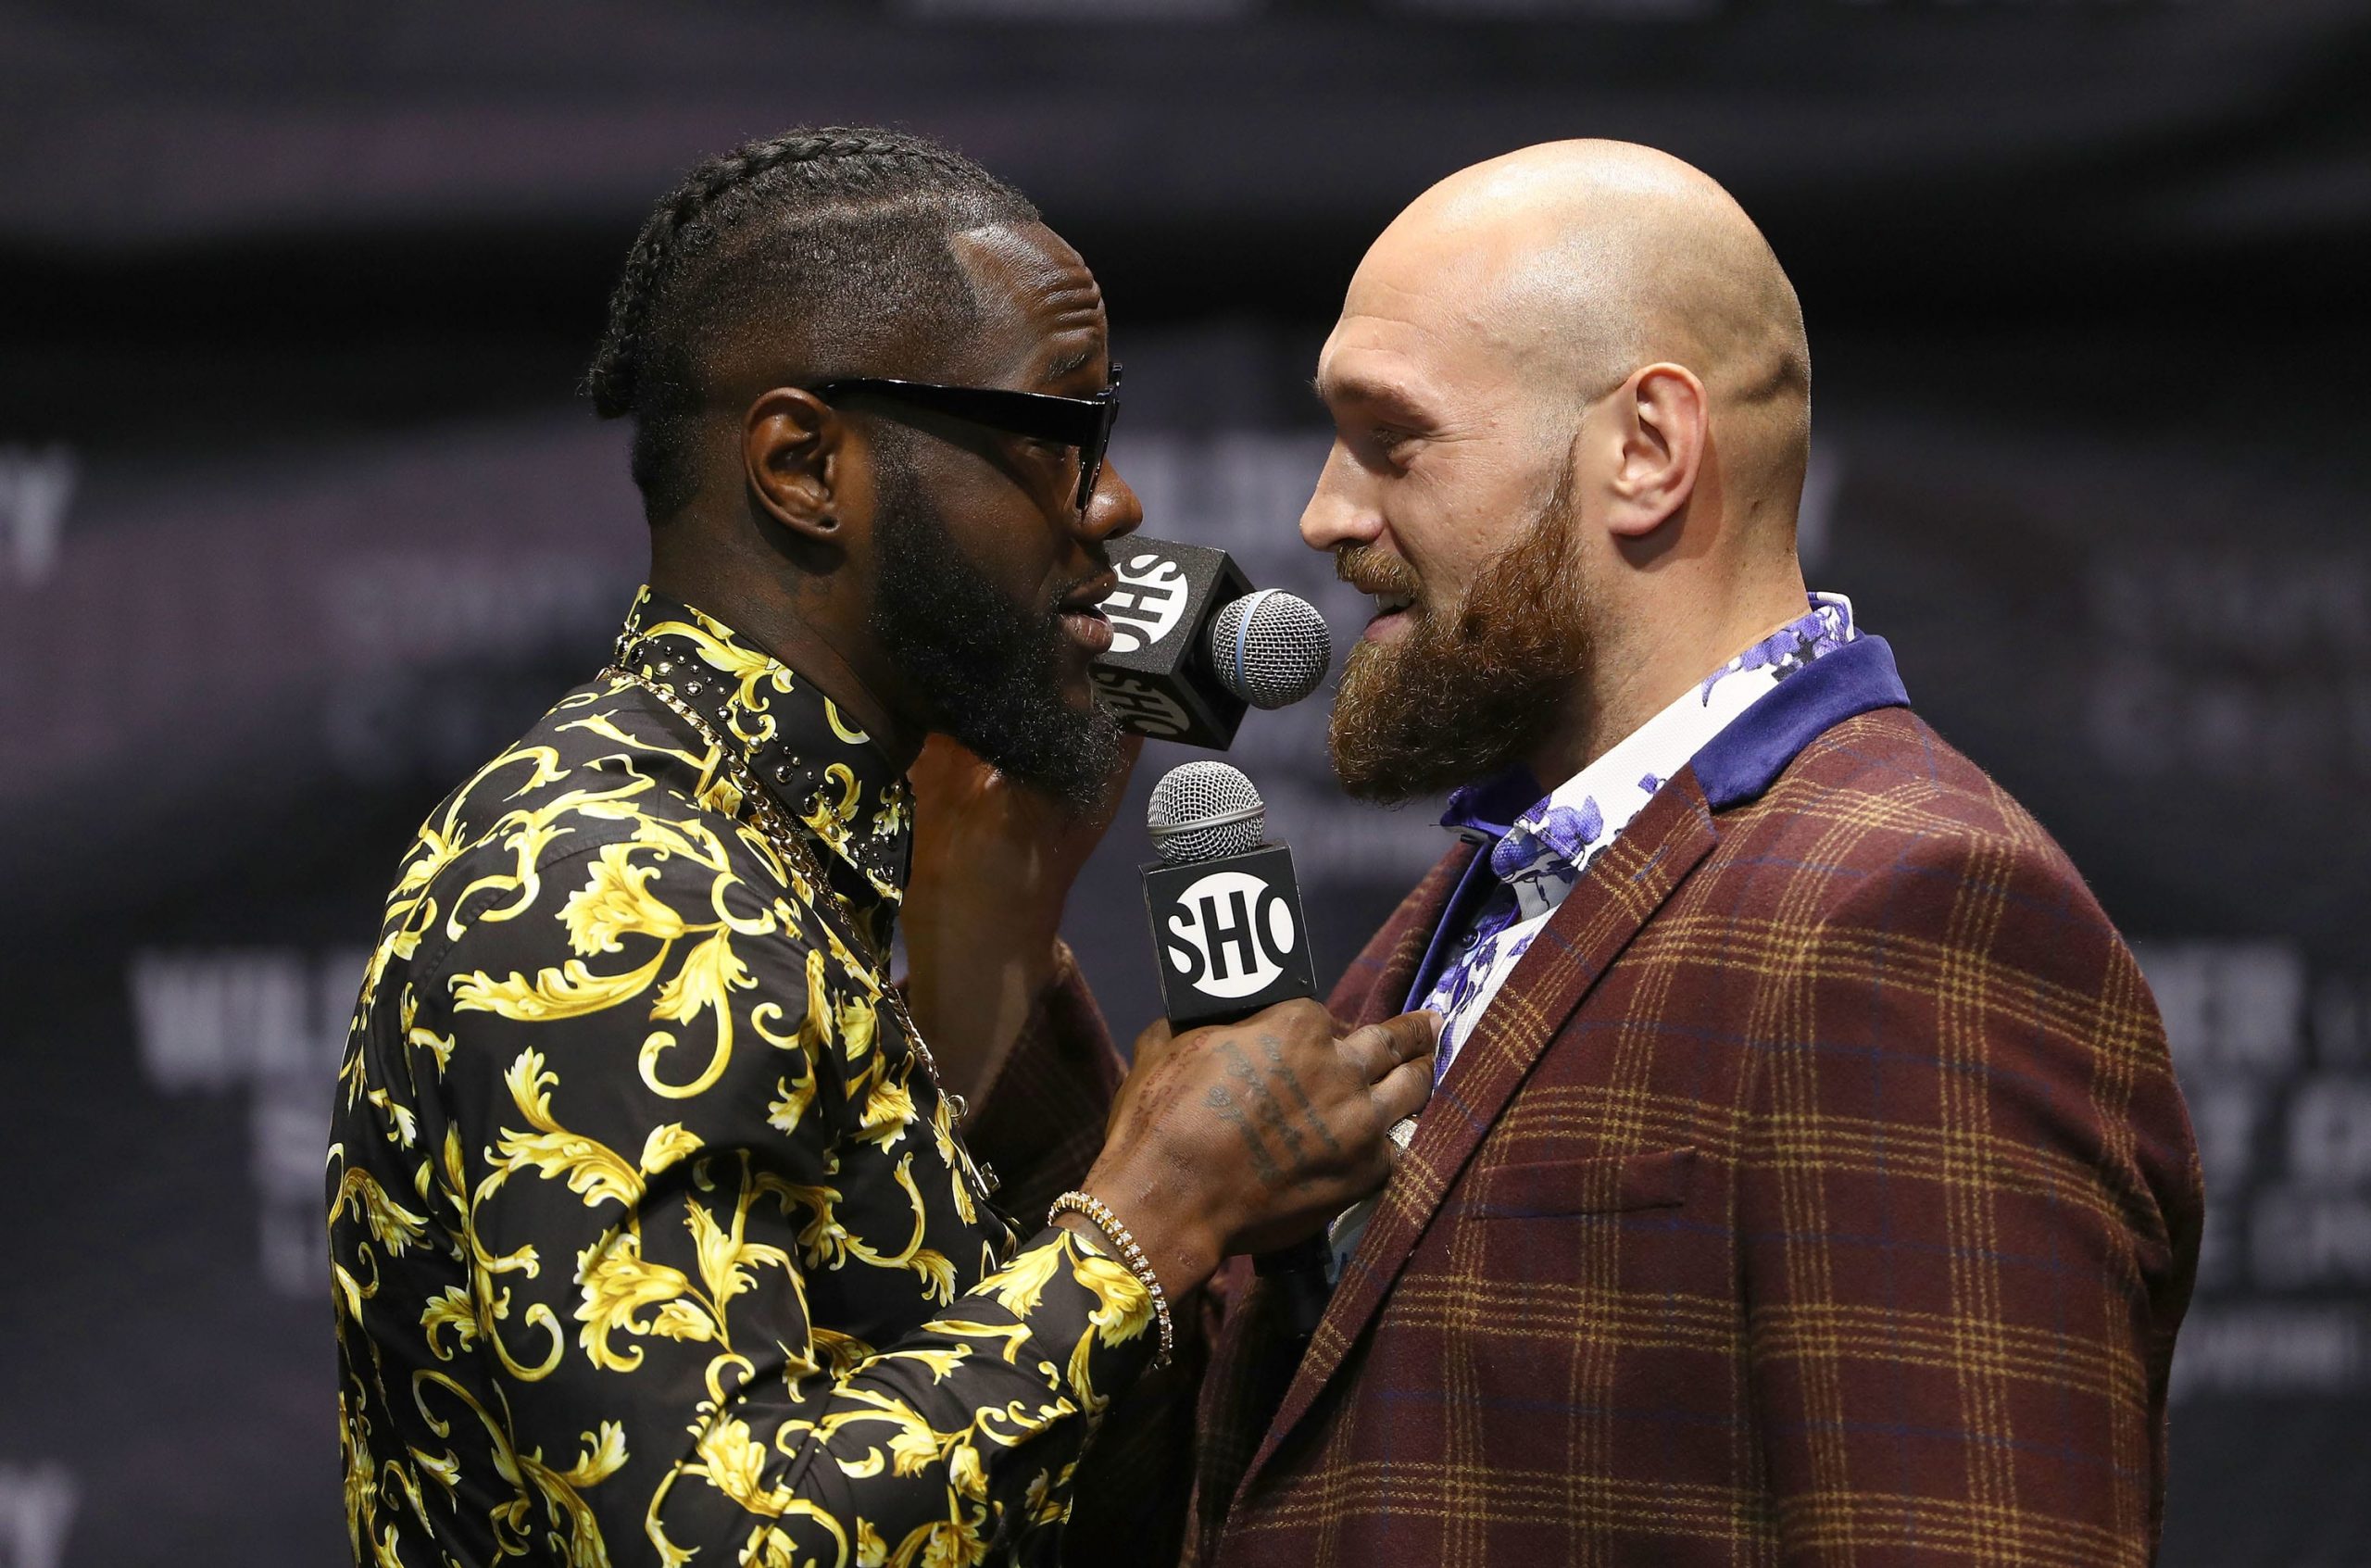 Deontay Wilder rematch in opposition to Tyson Fury might high $100 million